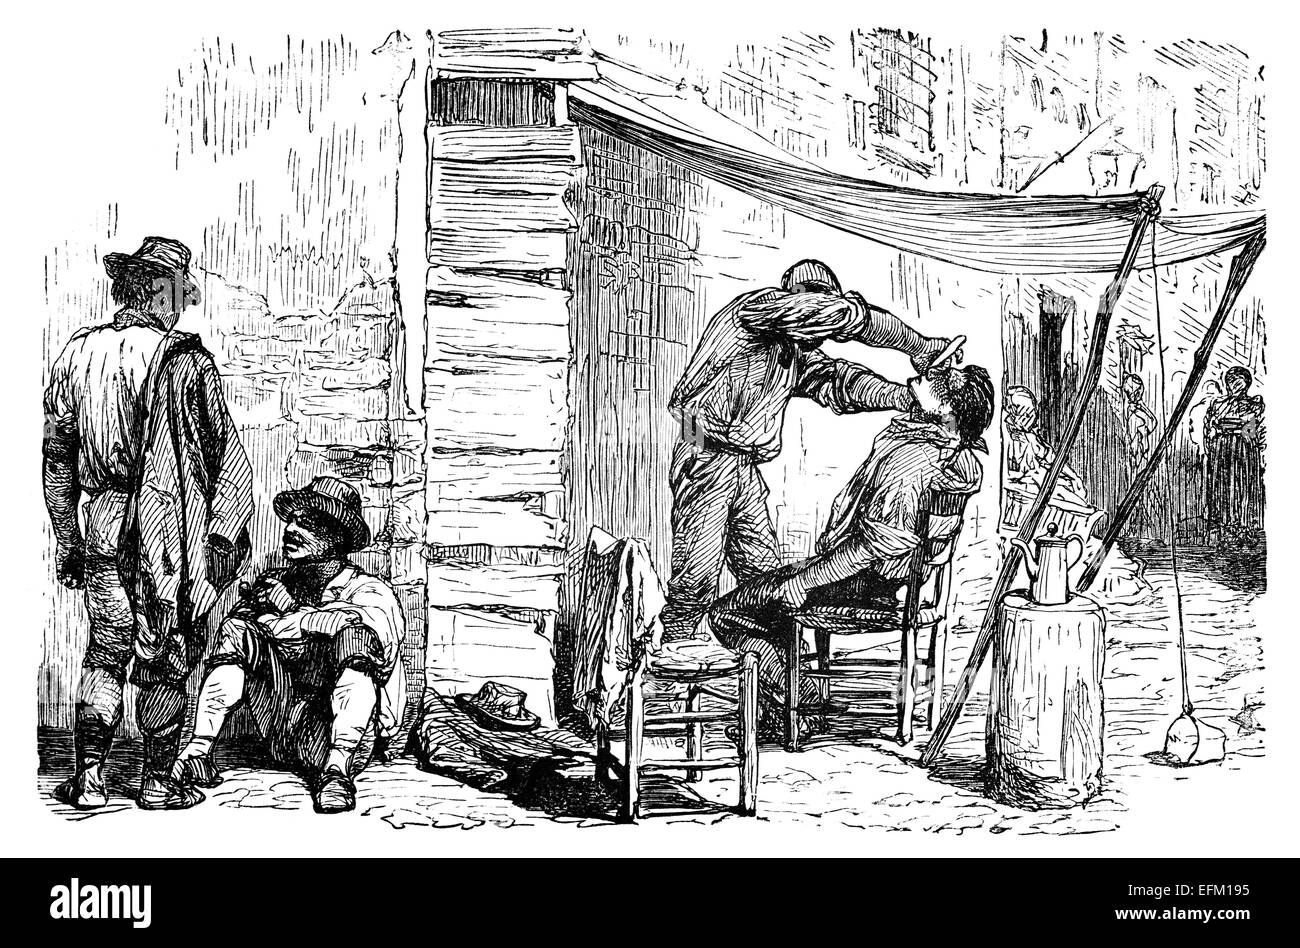 19th century engraving of a street scene where a barber is shaving a man, Rome, Italy Stock Photo